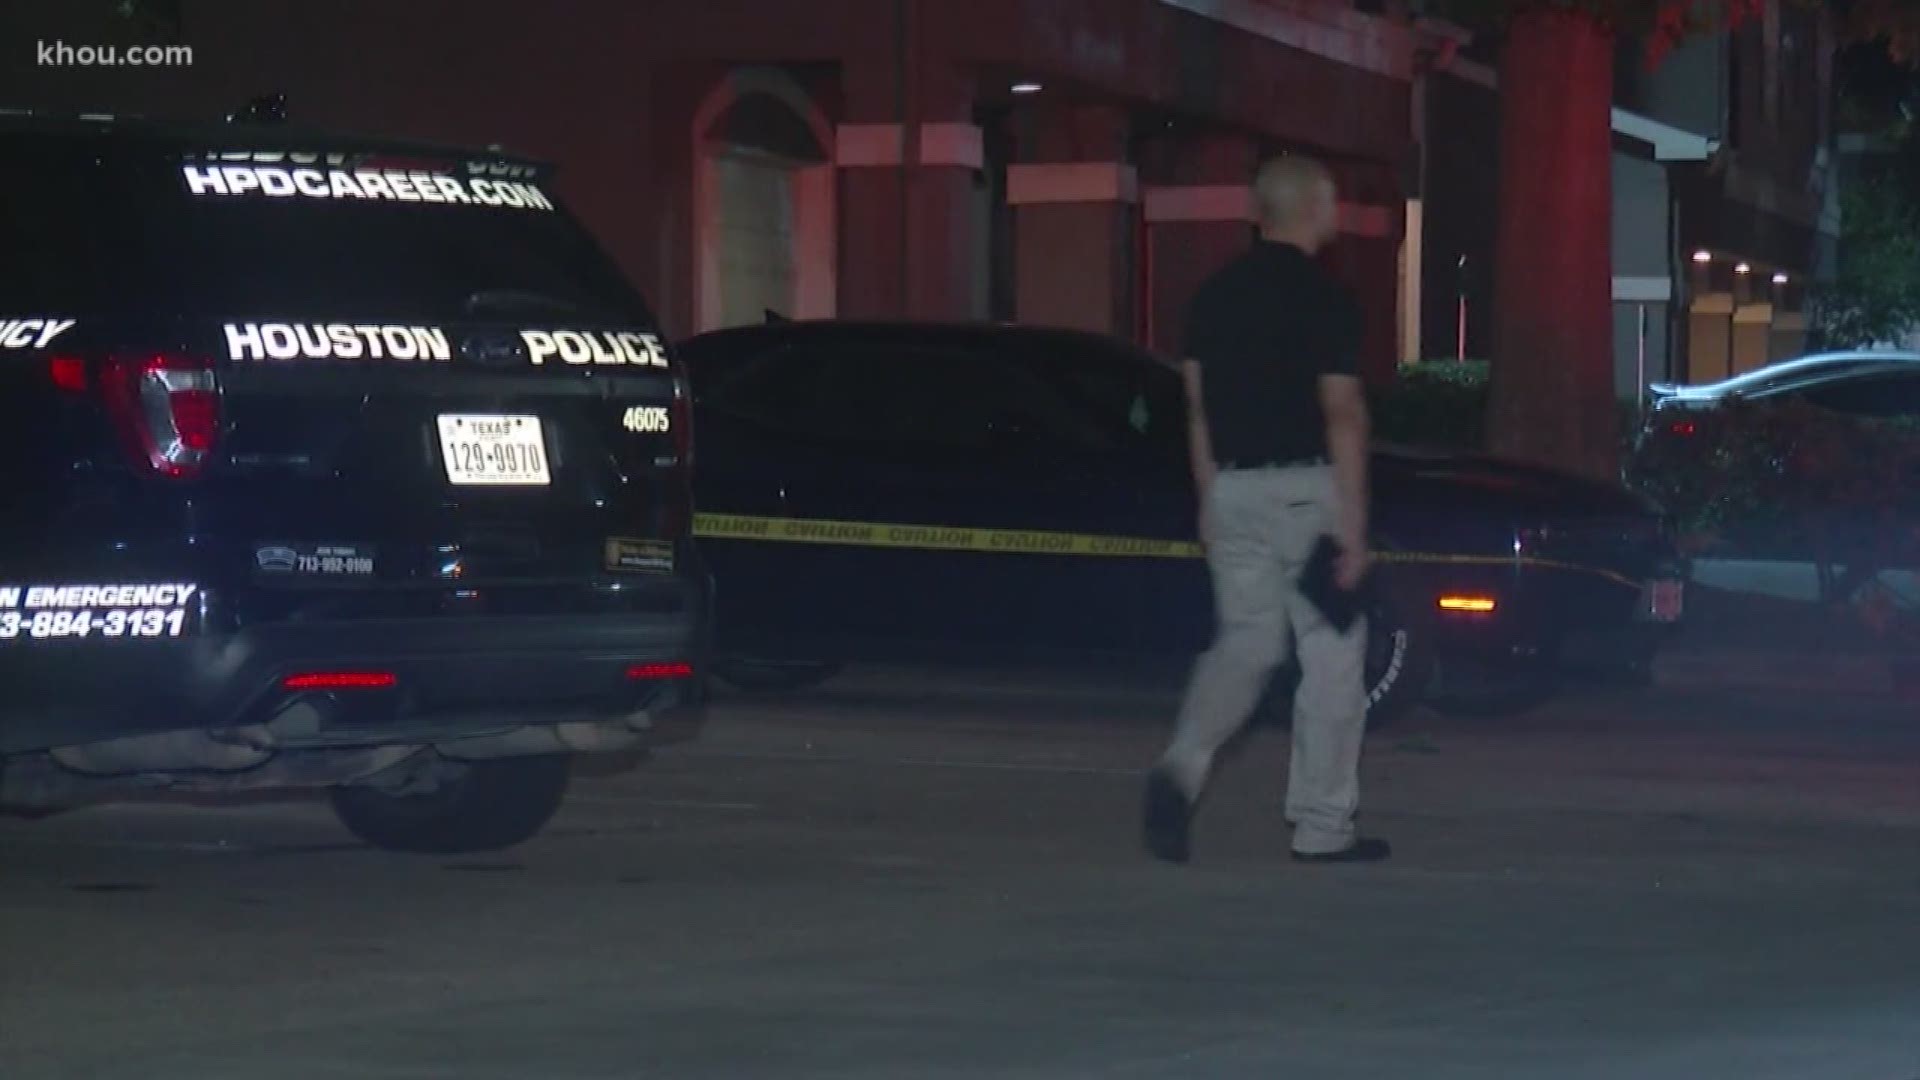 A woman who had been reported missing was found dead inside a car at a west Houston apartment complex overnight.